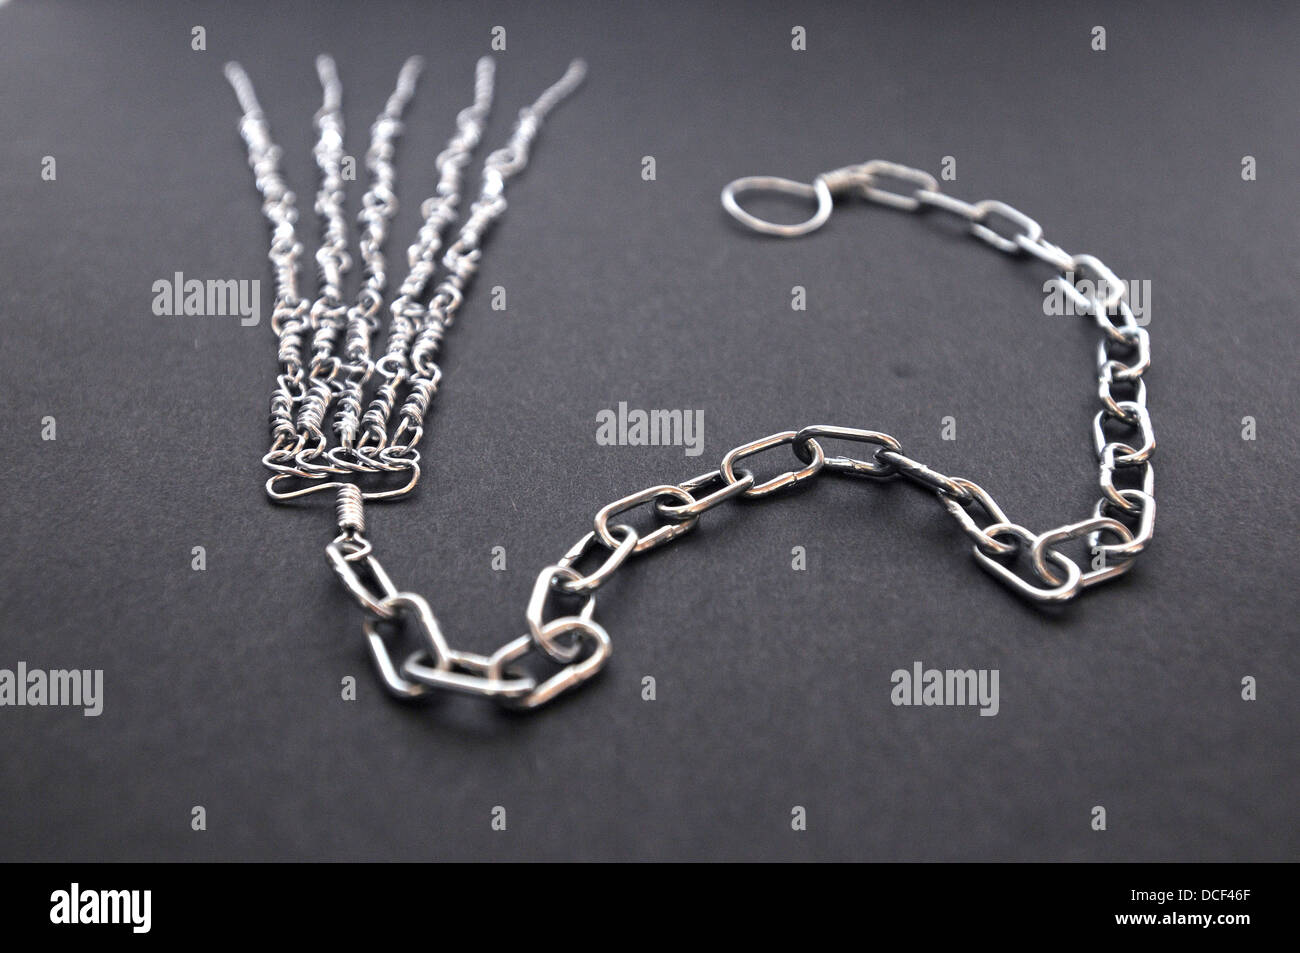 A  metal chain discipline made by Nuns used as Penance , Stock Photo